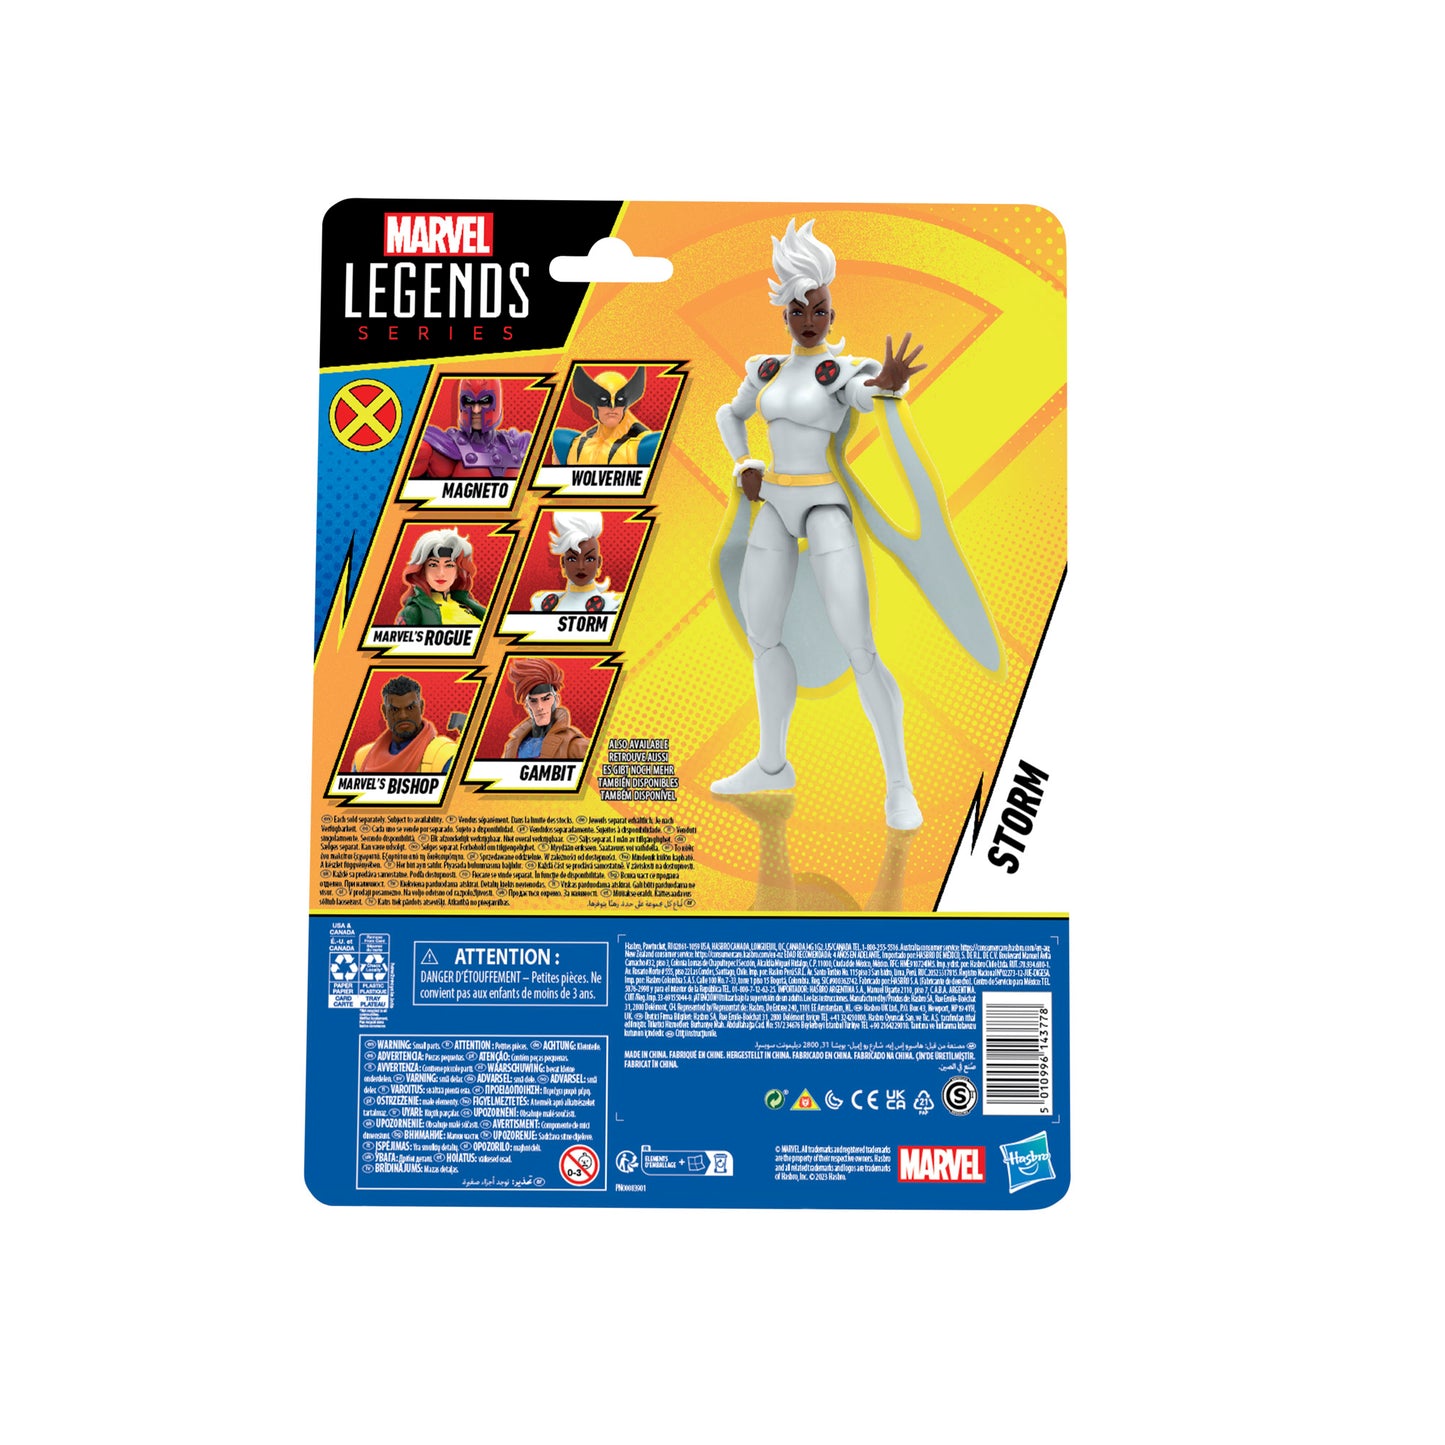 Hasbro Marvel Legends Series Storm Action Figure Toy in a box back view - Heretoserveyou